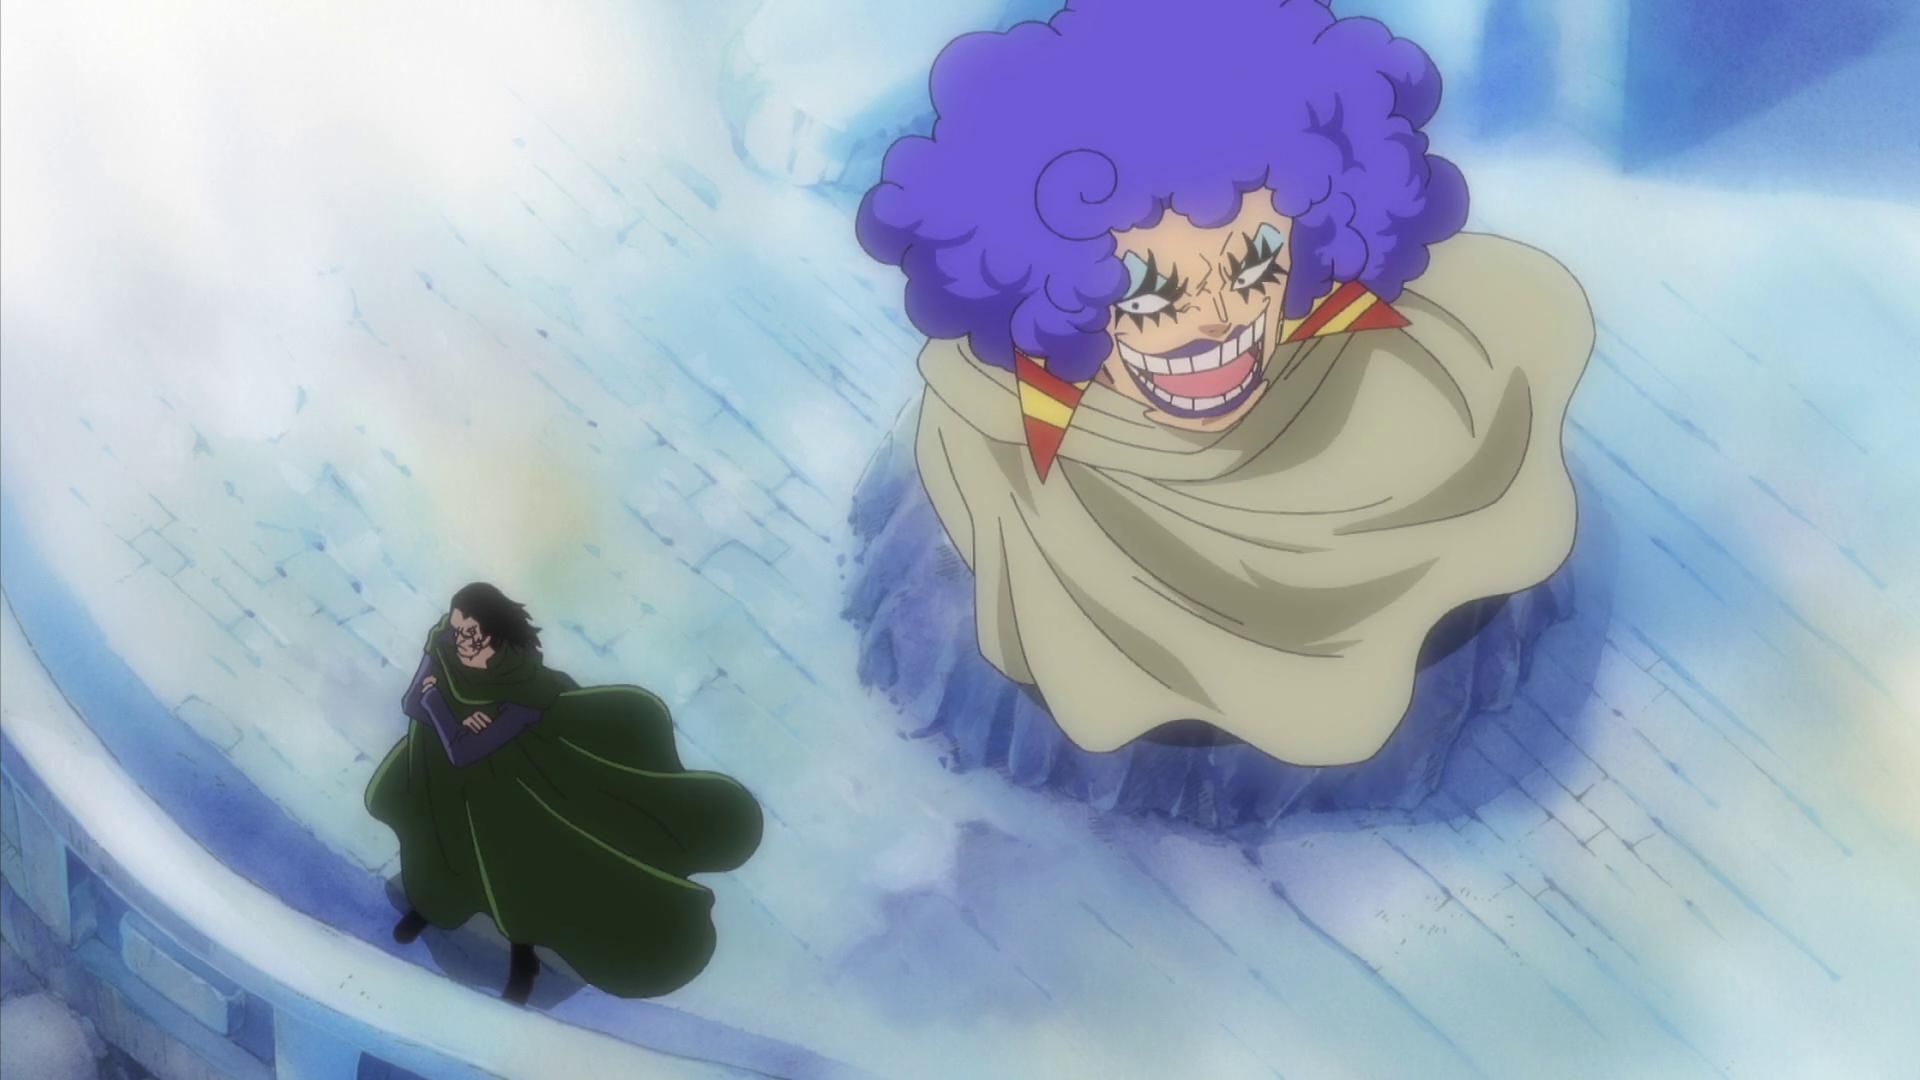 Dragon and Ivankov in the Revolutionary Army (Image via Toei Animation, One Piece)